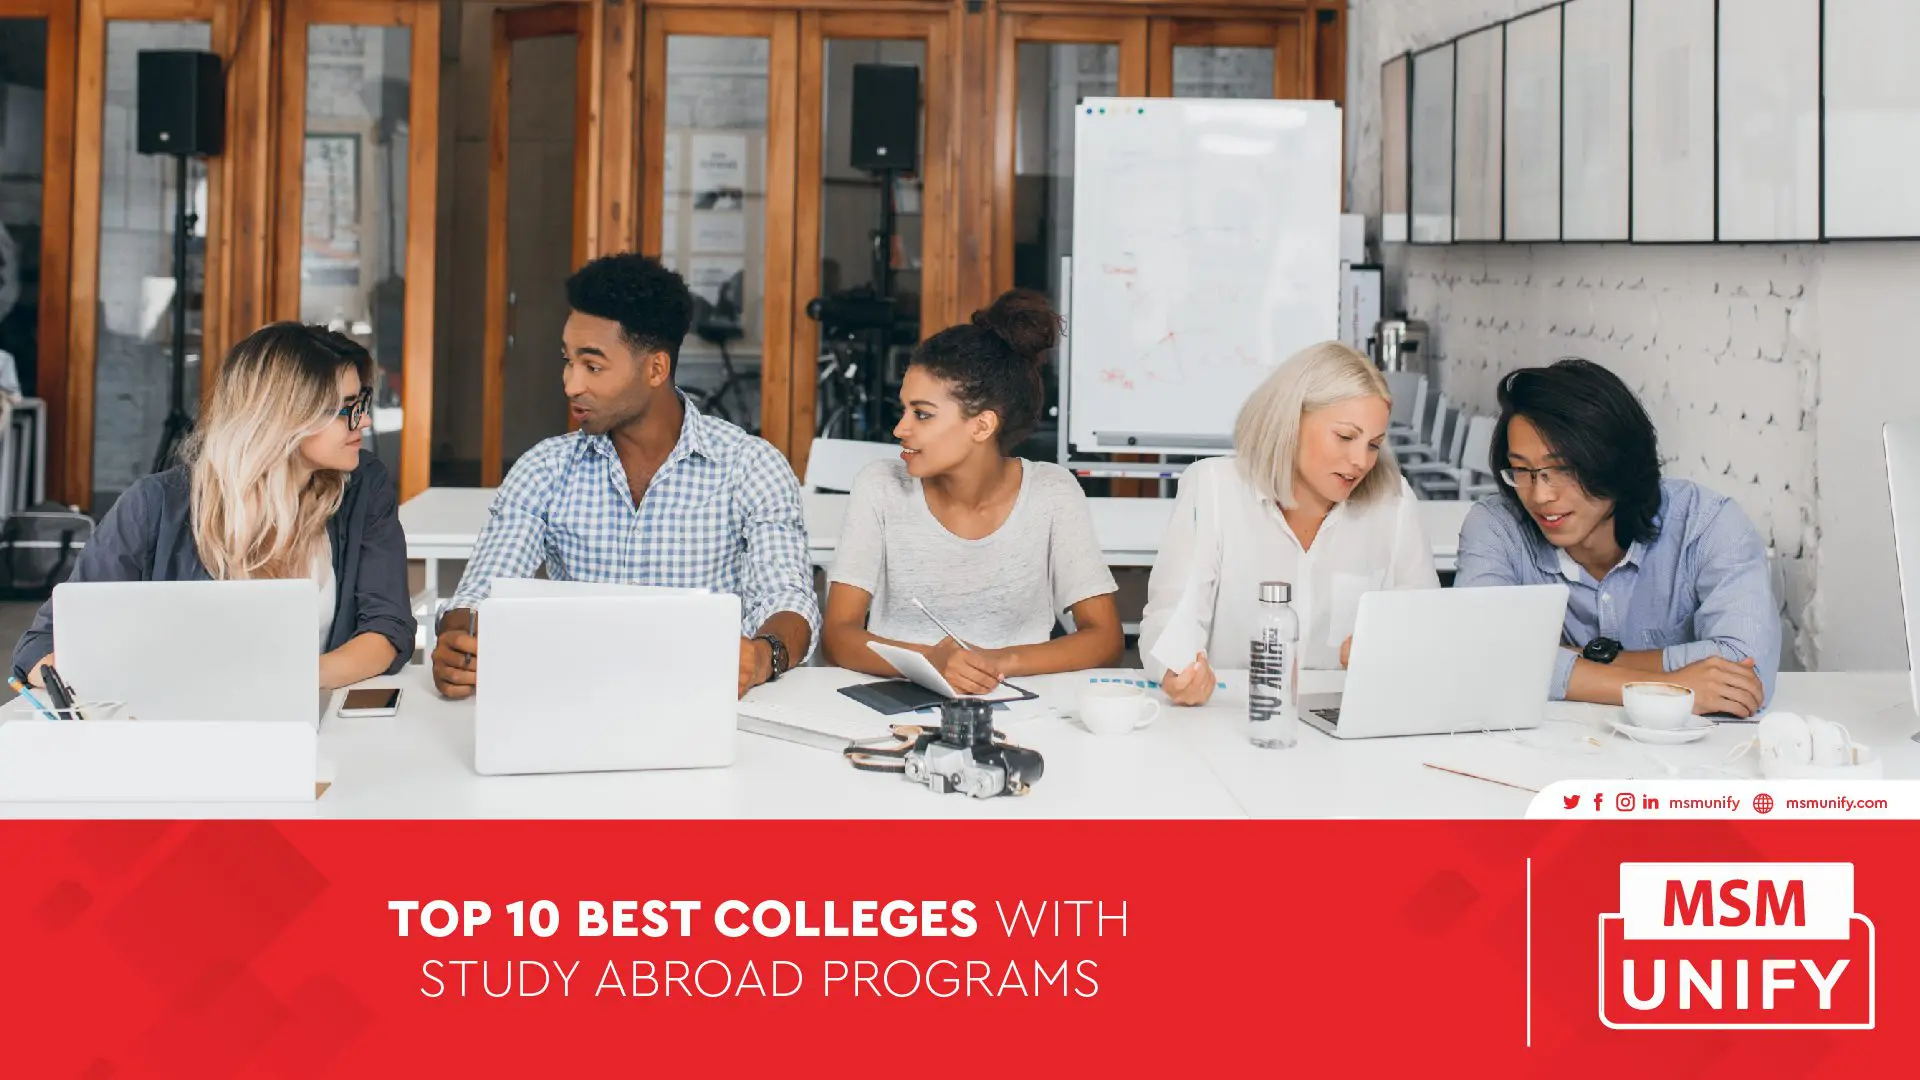 111022 MSM Unify Top 10 Best Colleges With Study Abroad Programs 01